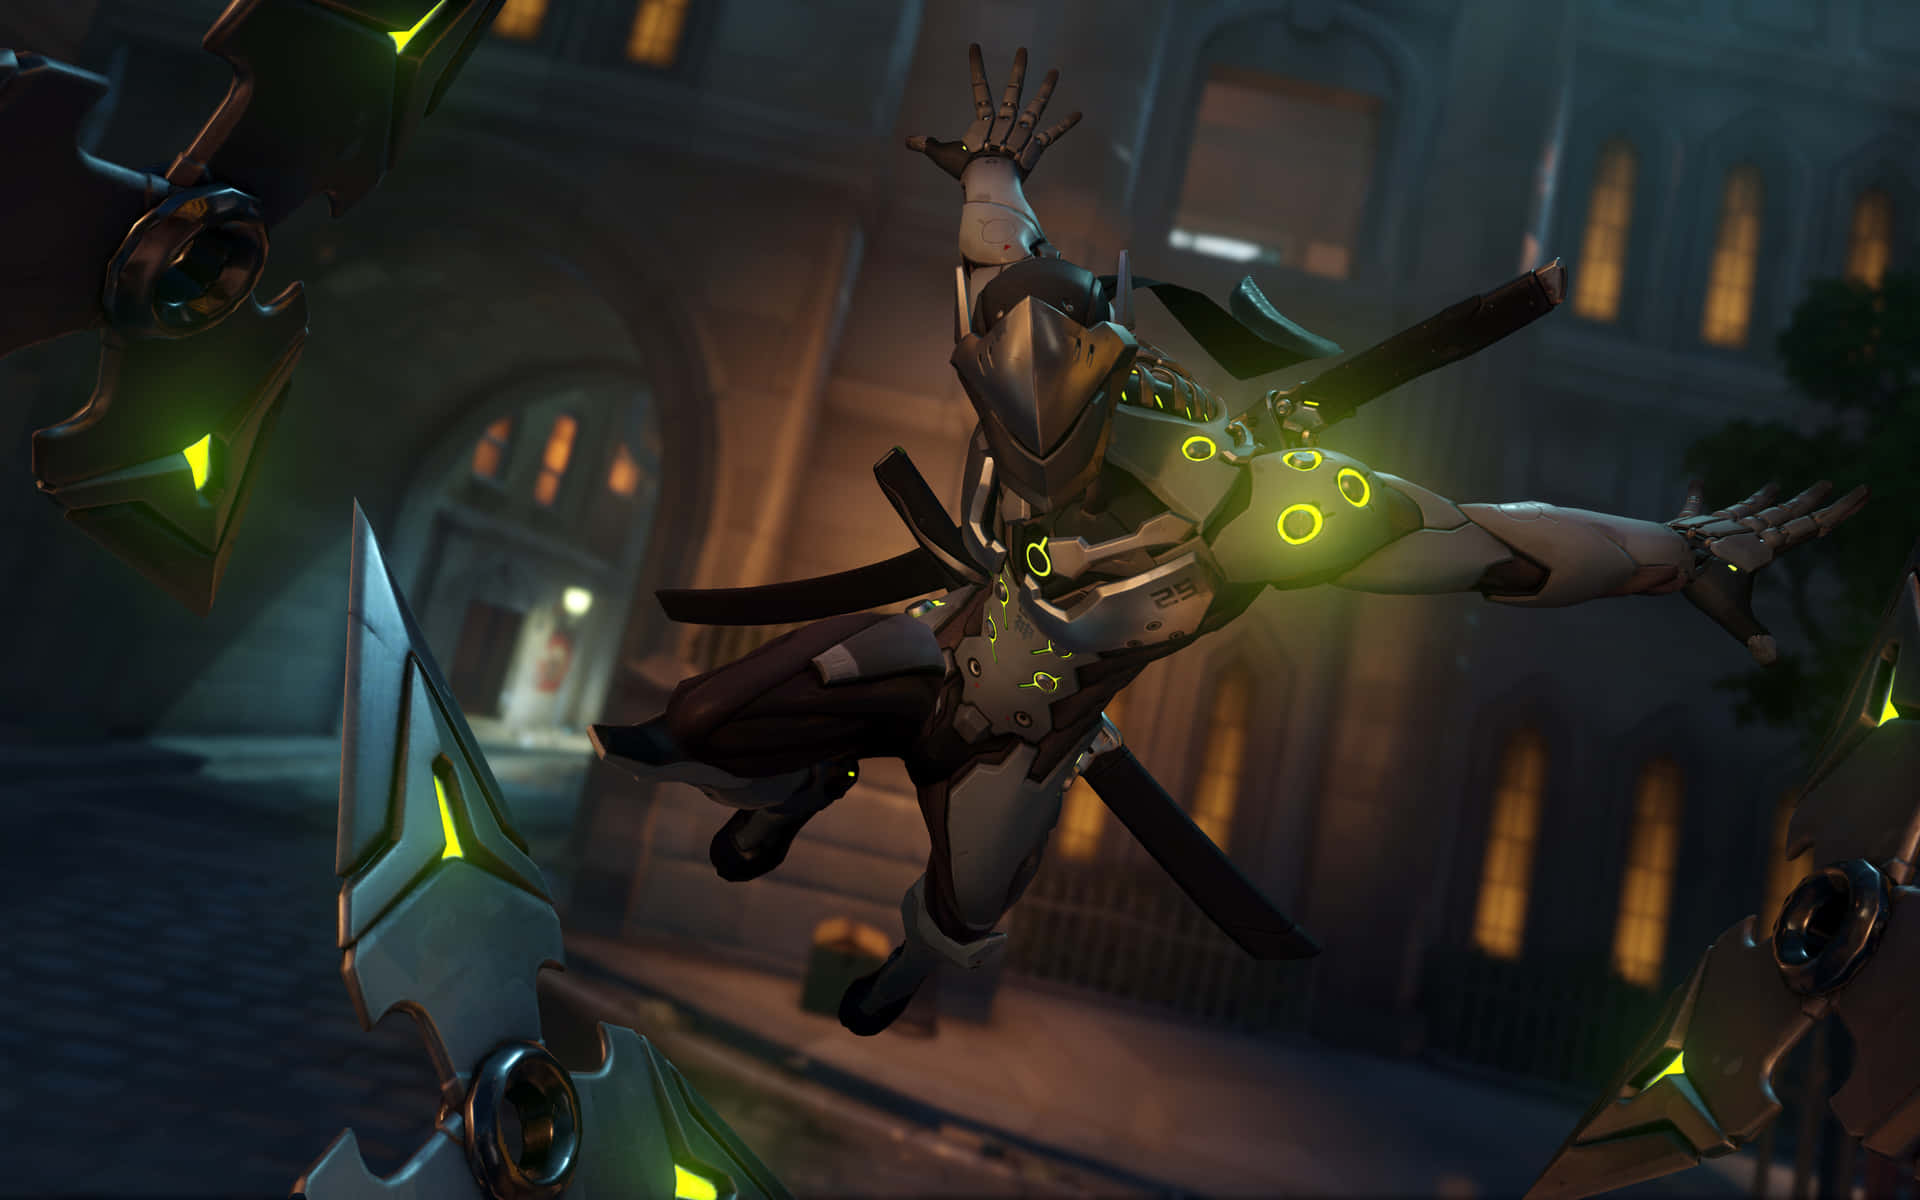 Get Into The Action With The Intense Genji 4K Video Game Wallpaper